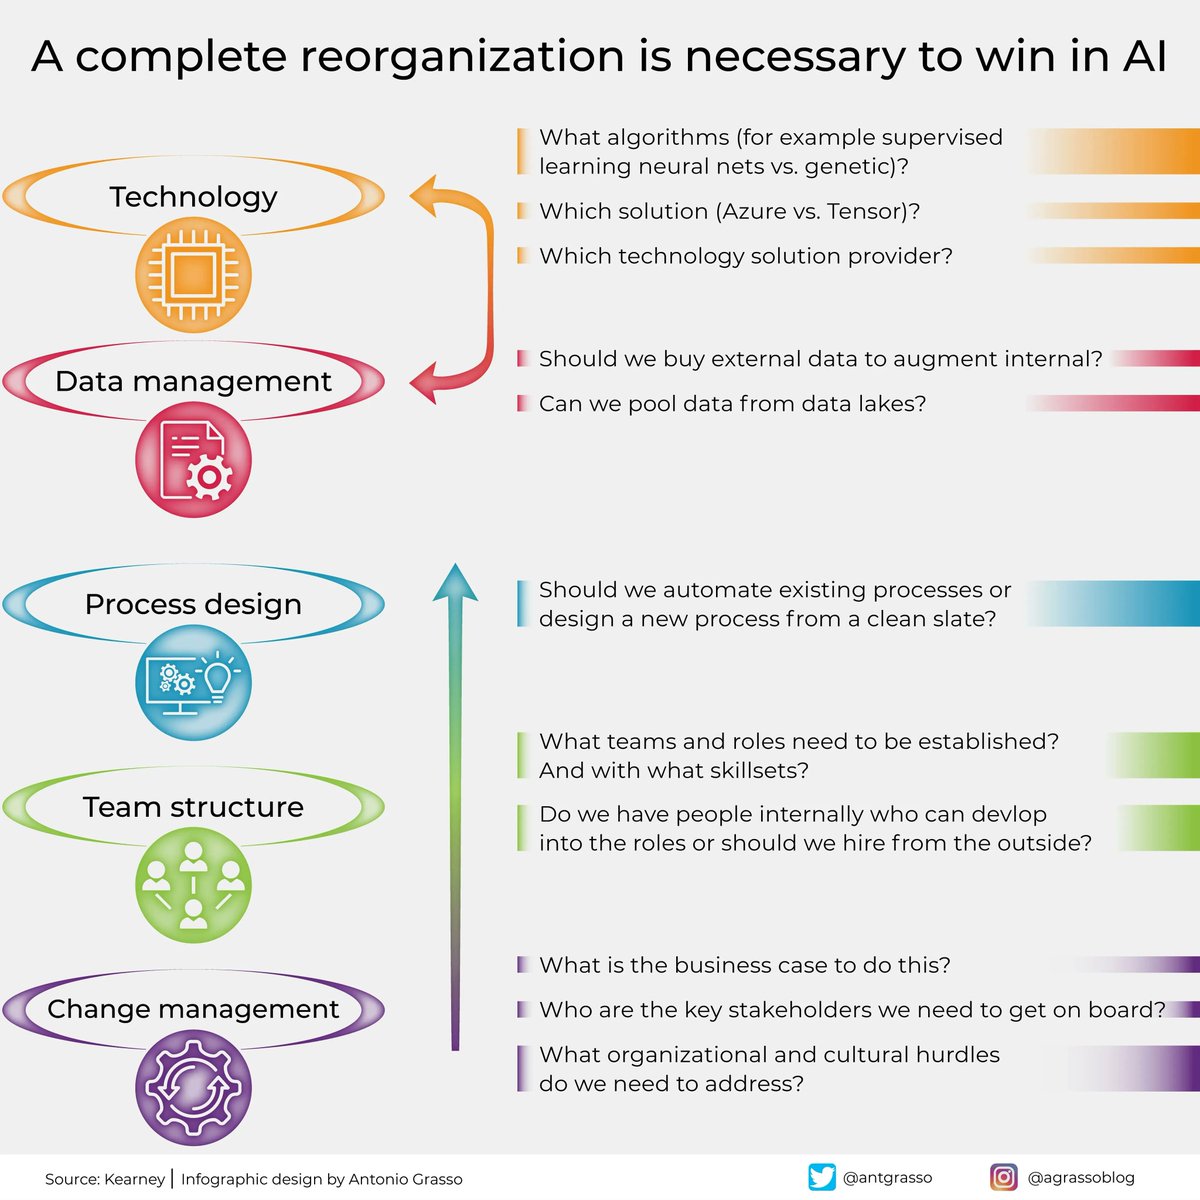 A thorough reorganization is vital to excelling in AI, such as adopting the most effective algorithms, strategic data management, innovative process design, building a skilled team, and managing change to align with business goals and cultural values. Microblog @antgrasso #AI